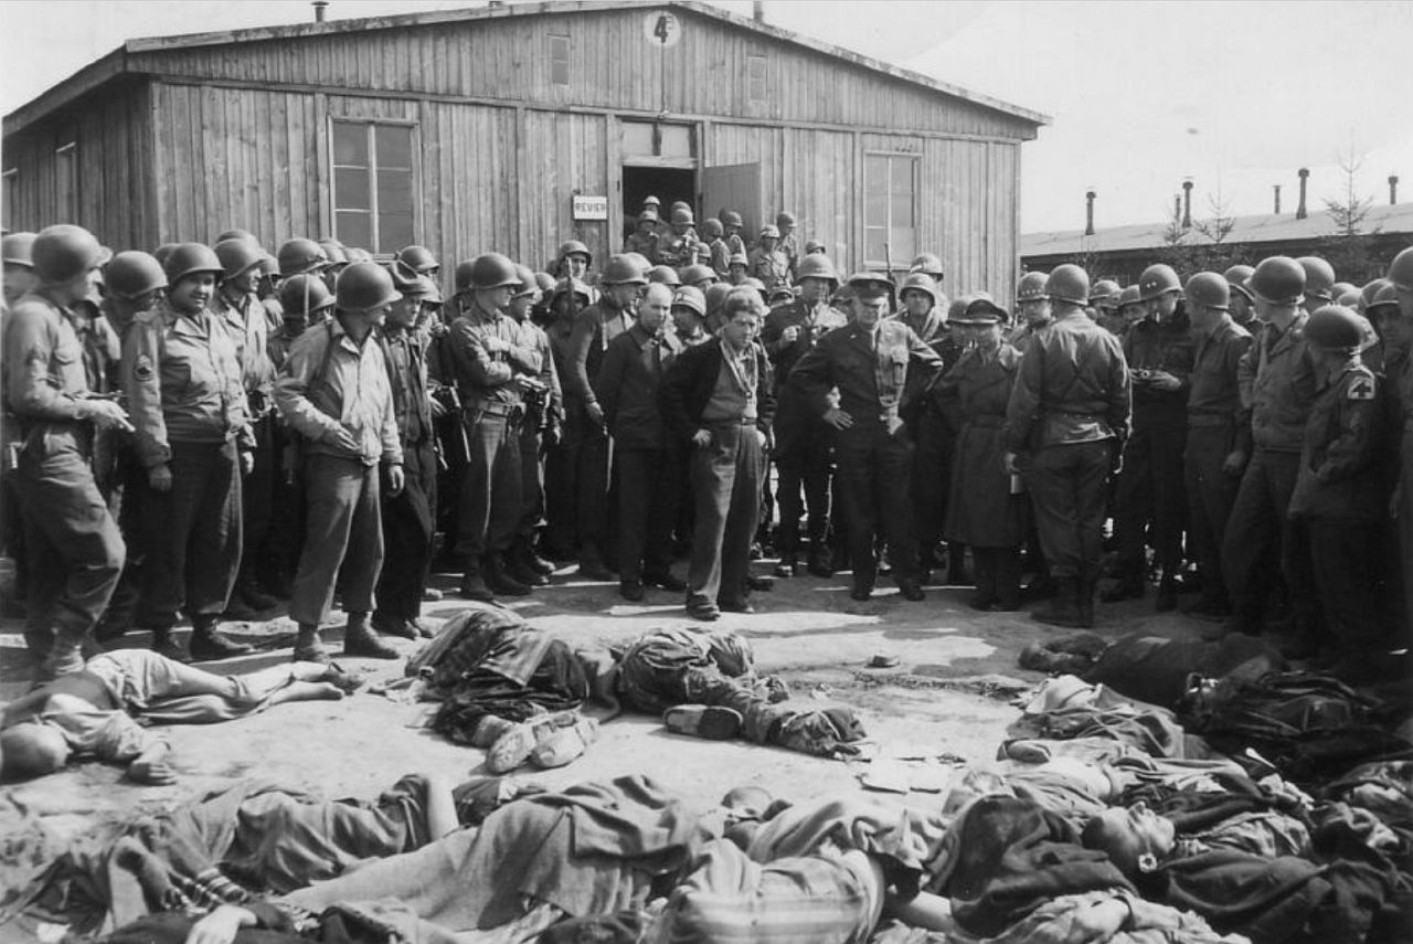 General Eisenhower visits the liberated subcamp Ohrdruf. On his left: one of the few survivors. In the background Block 4, one of the Revierbaracken in the north camp.